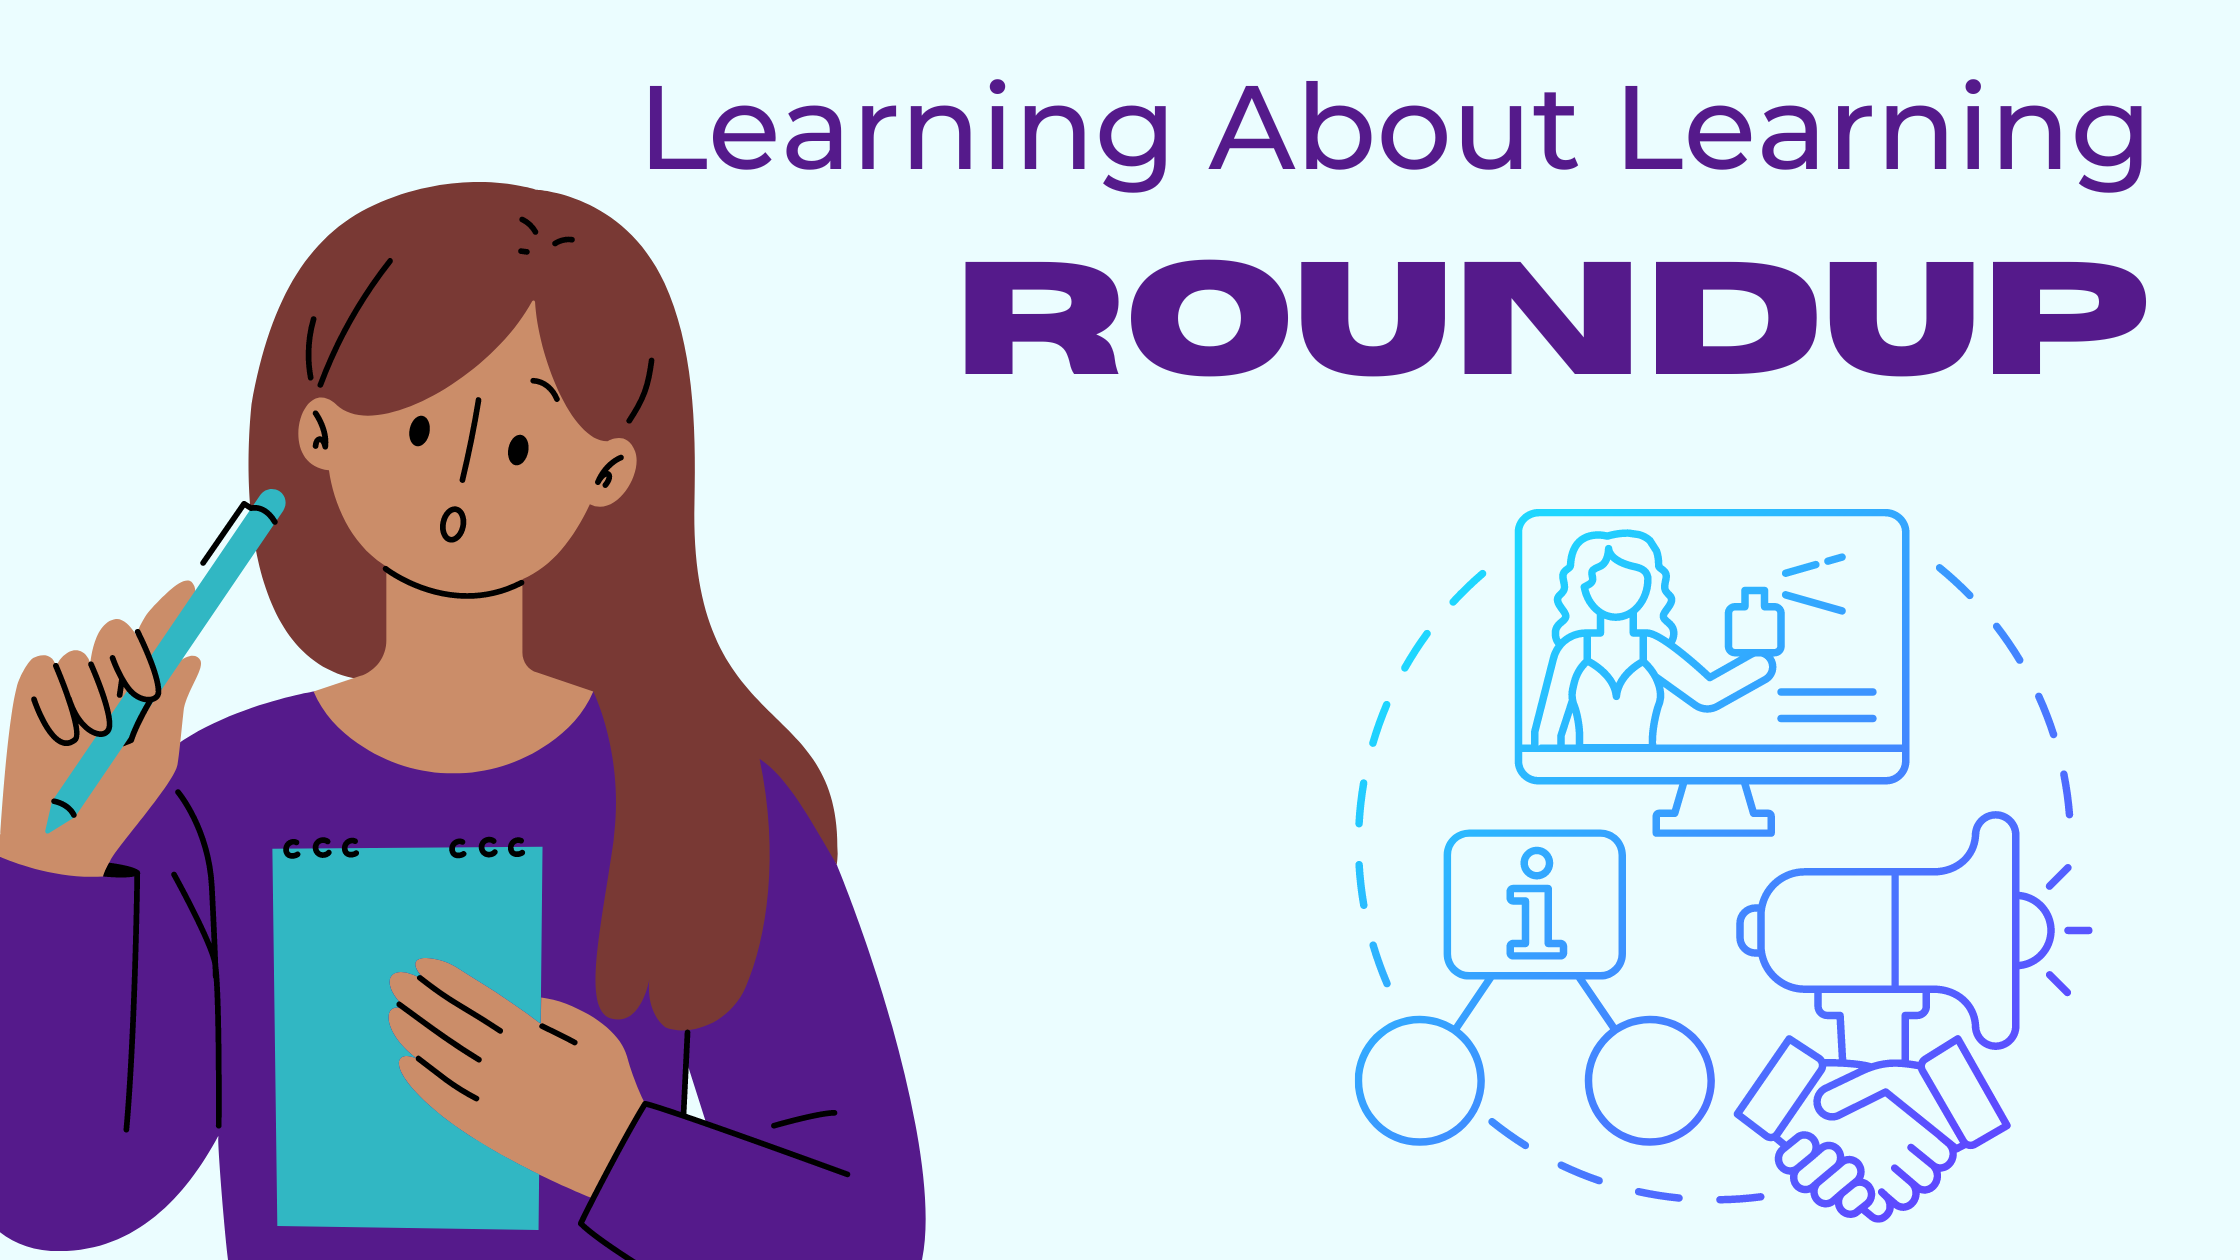 Learning About Learning Roundup. A woman holds a notebook and pen as she's thinking.